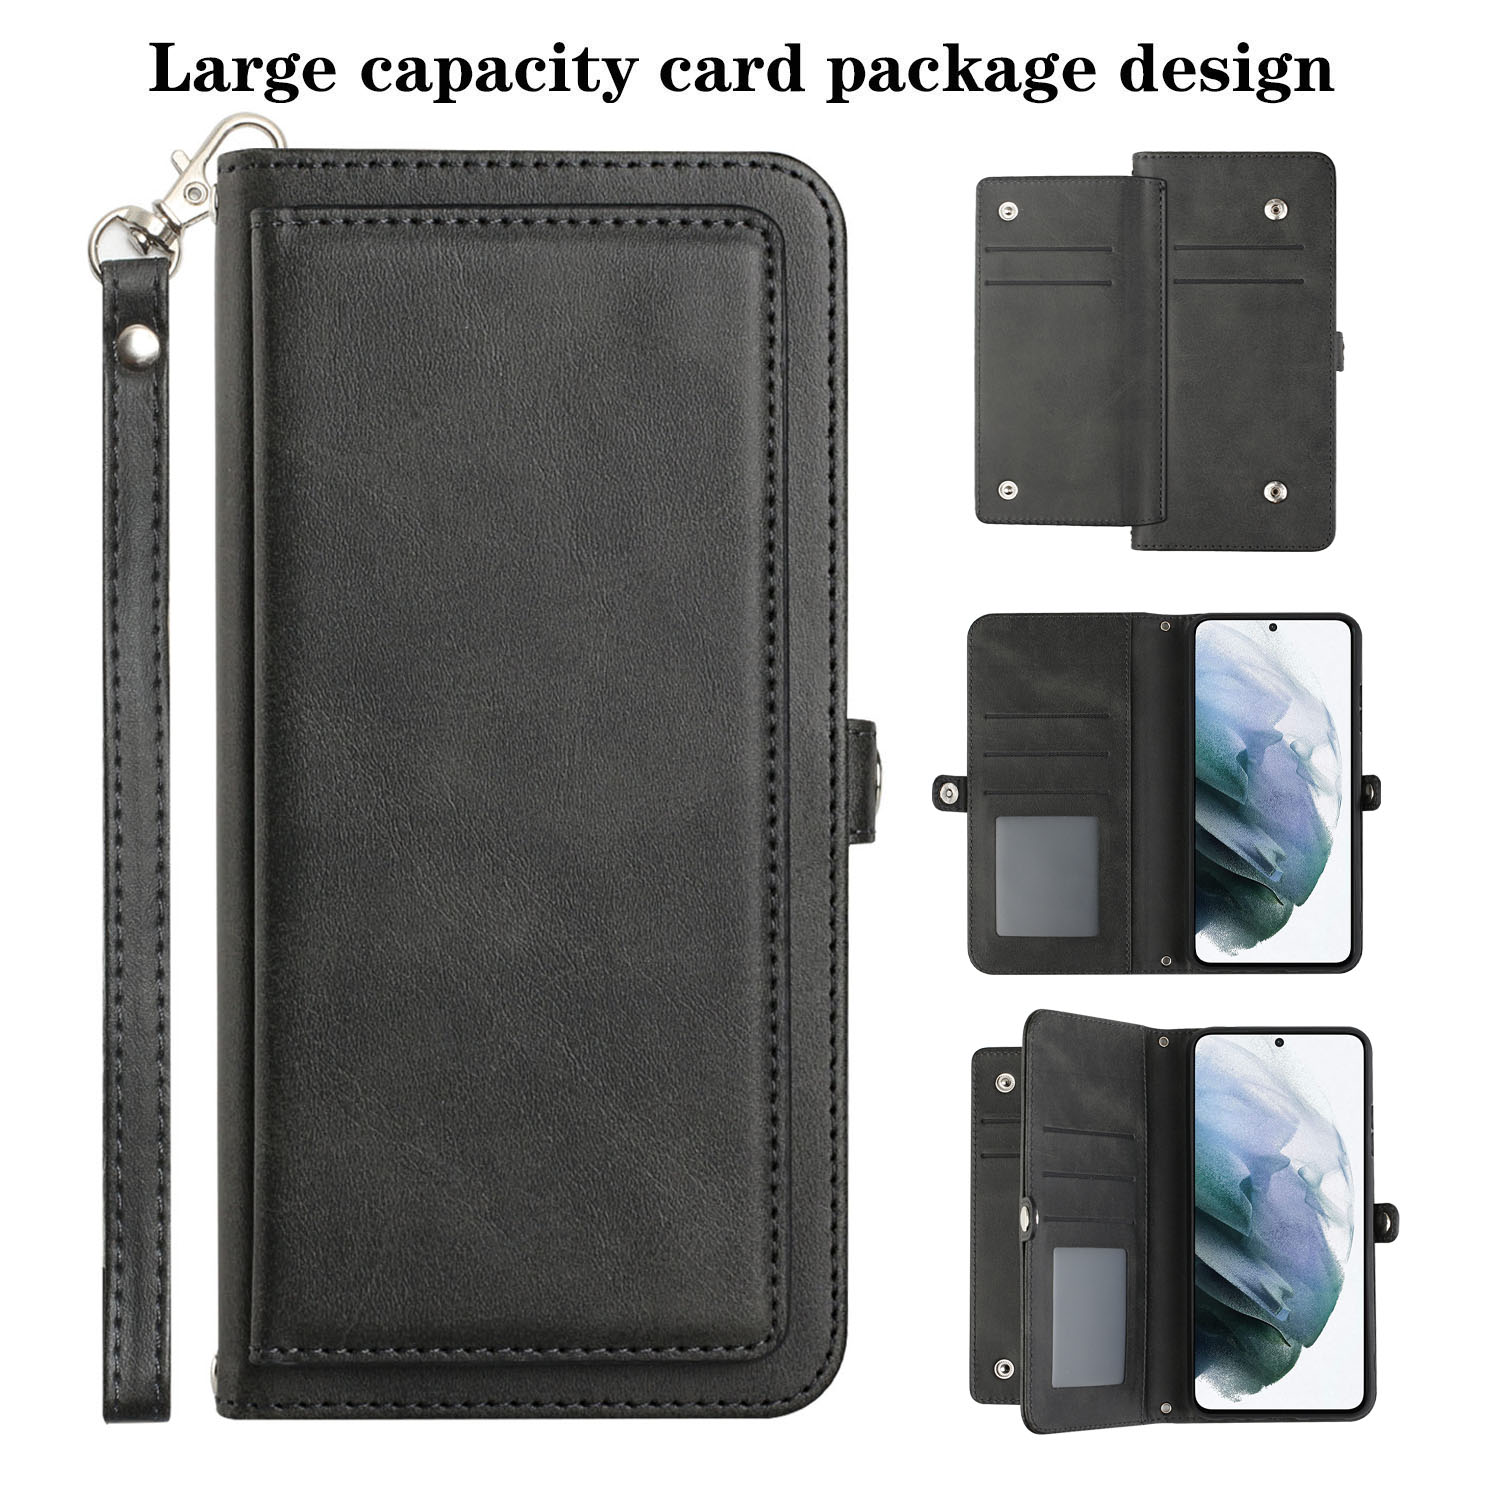 Premium PU Leather Folio Wallet Front Cover Case for Galaxy A33 5G (Black)